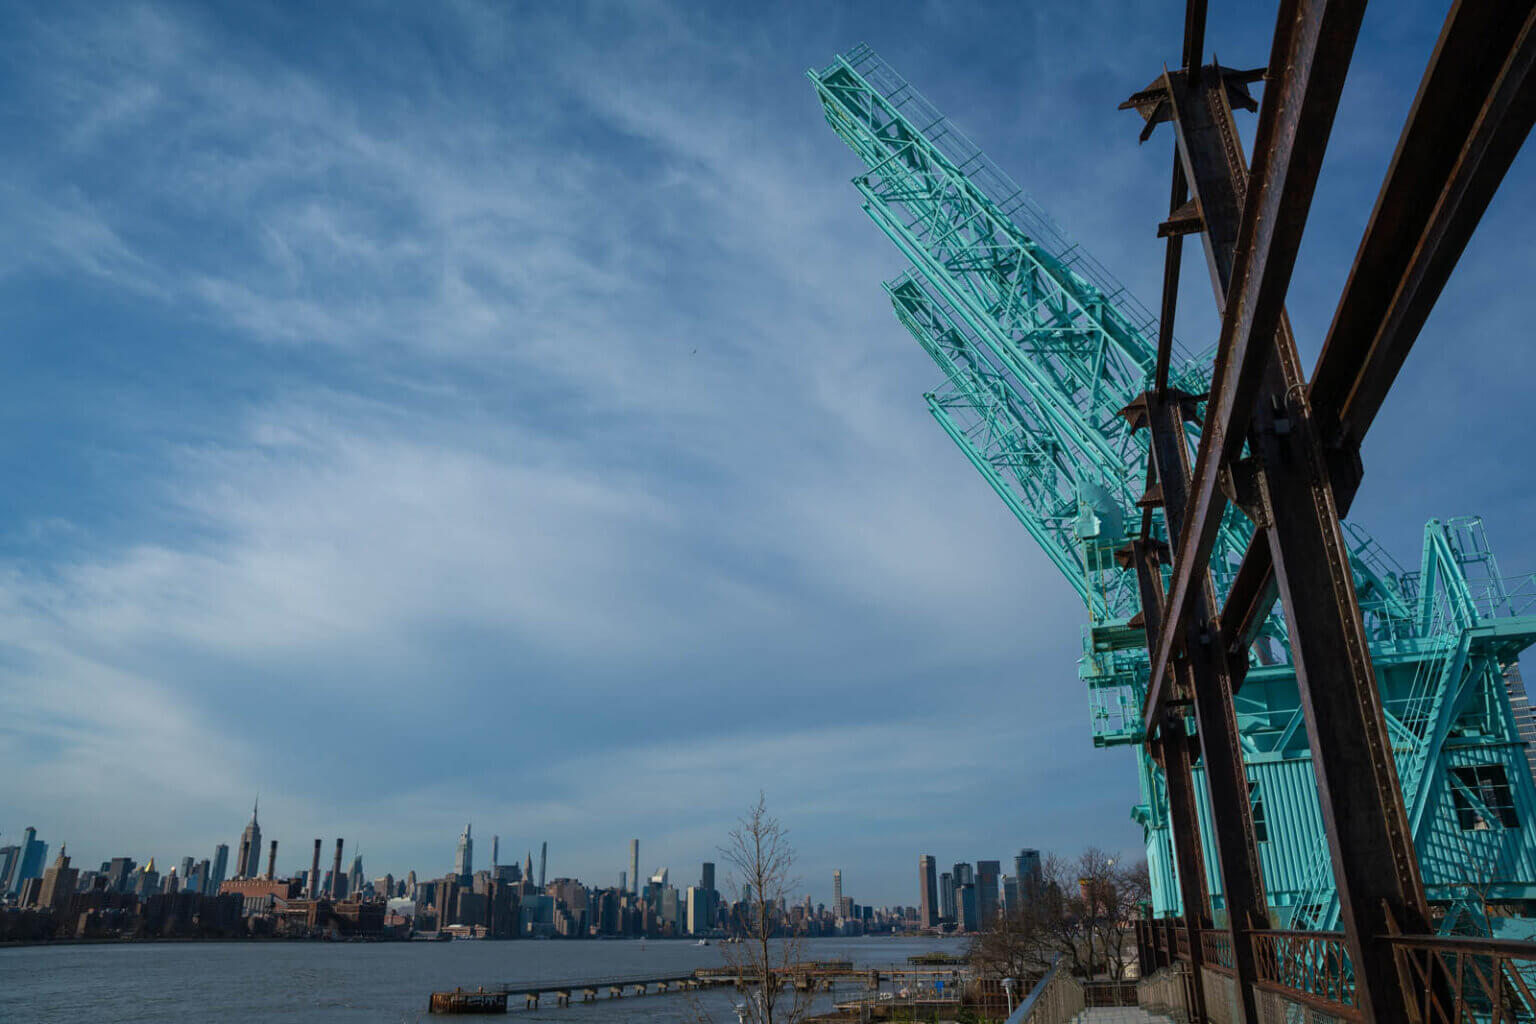 Cranes in Domino Park in Williamsburg Brooklyn along the EAst River with skyline views